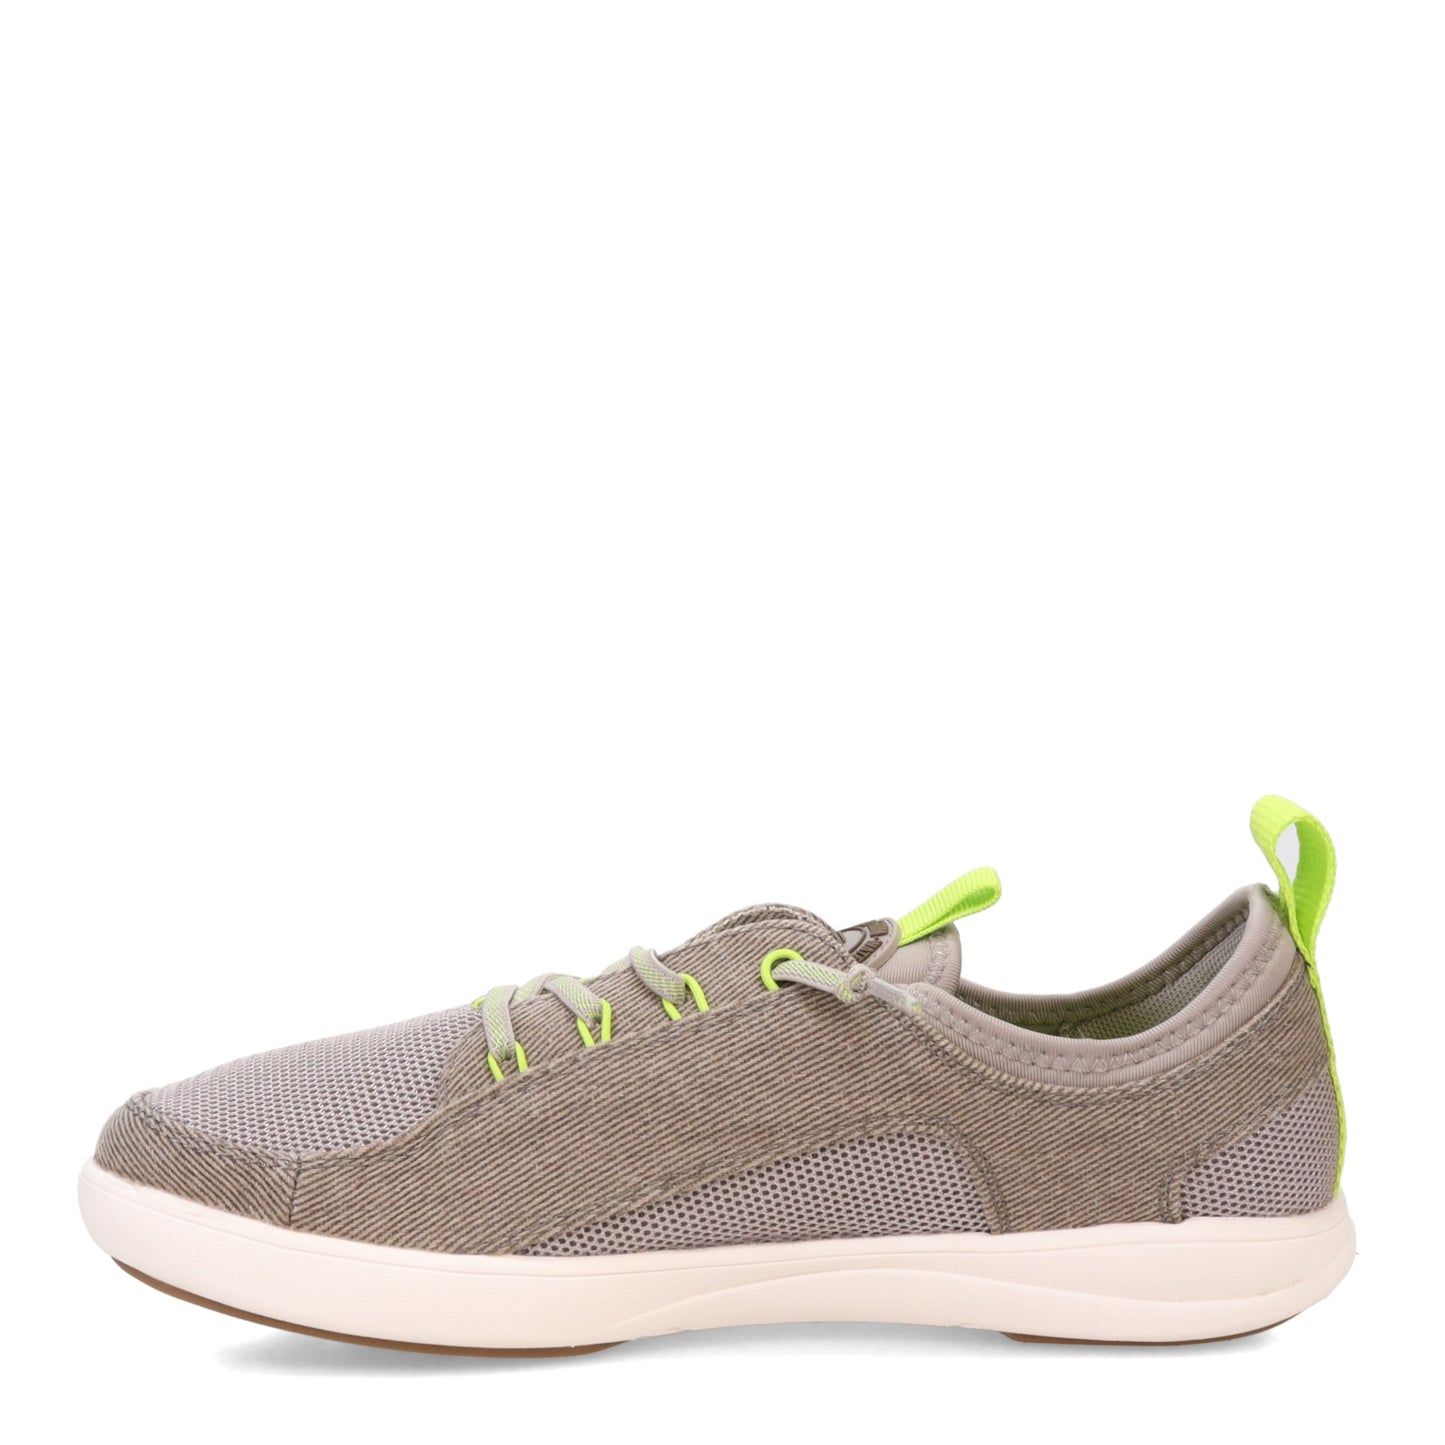 Peltz Shoes  Men's Hurley Castaic Sneaker Taupe CASTAIC-TAUPE